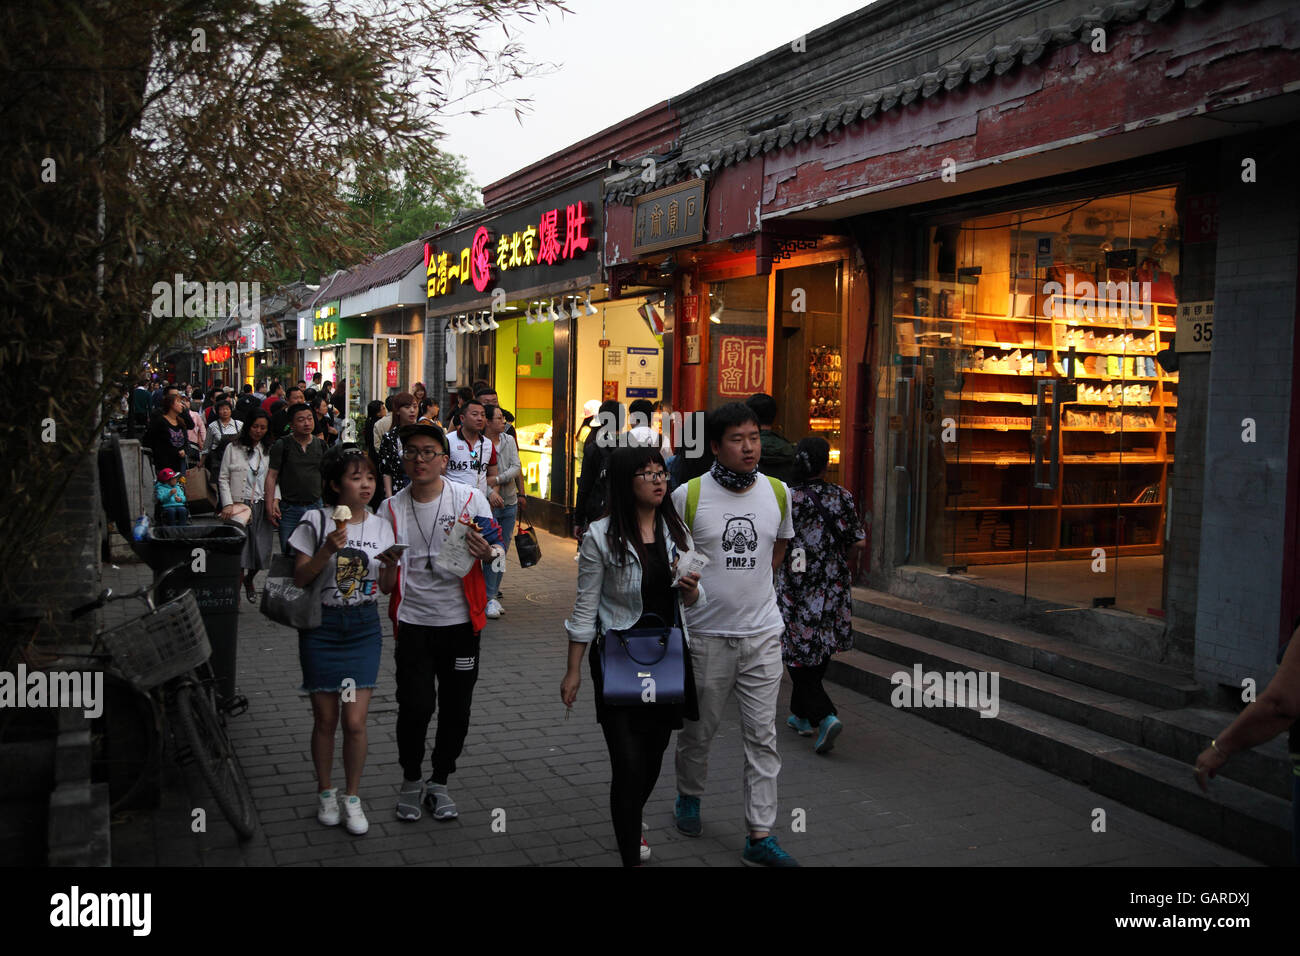 Chinese people and tourists walk in the evening in an alley of a historical hutong with lots of small shops. Nanluoguxiang Hutong, Beijing, China. Stock Photo